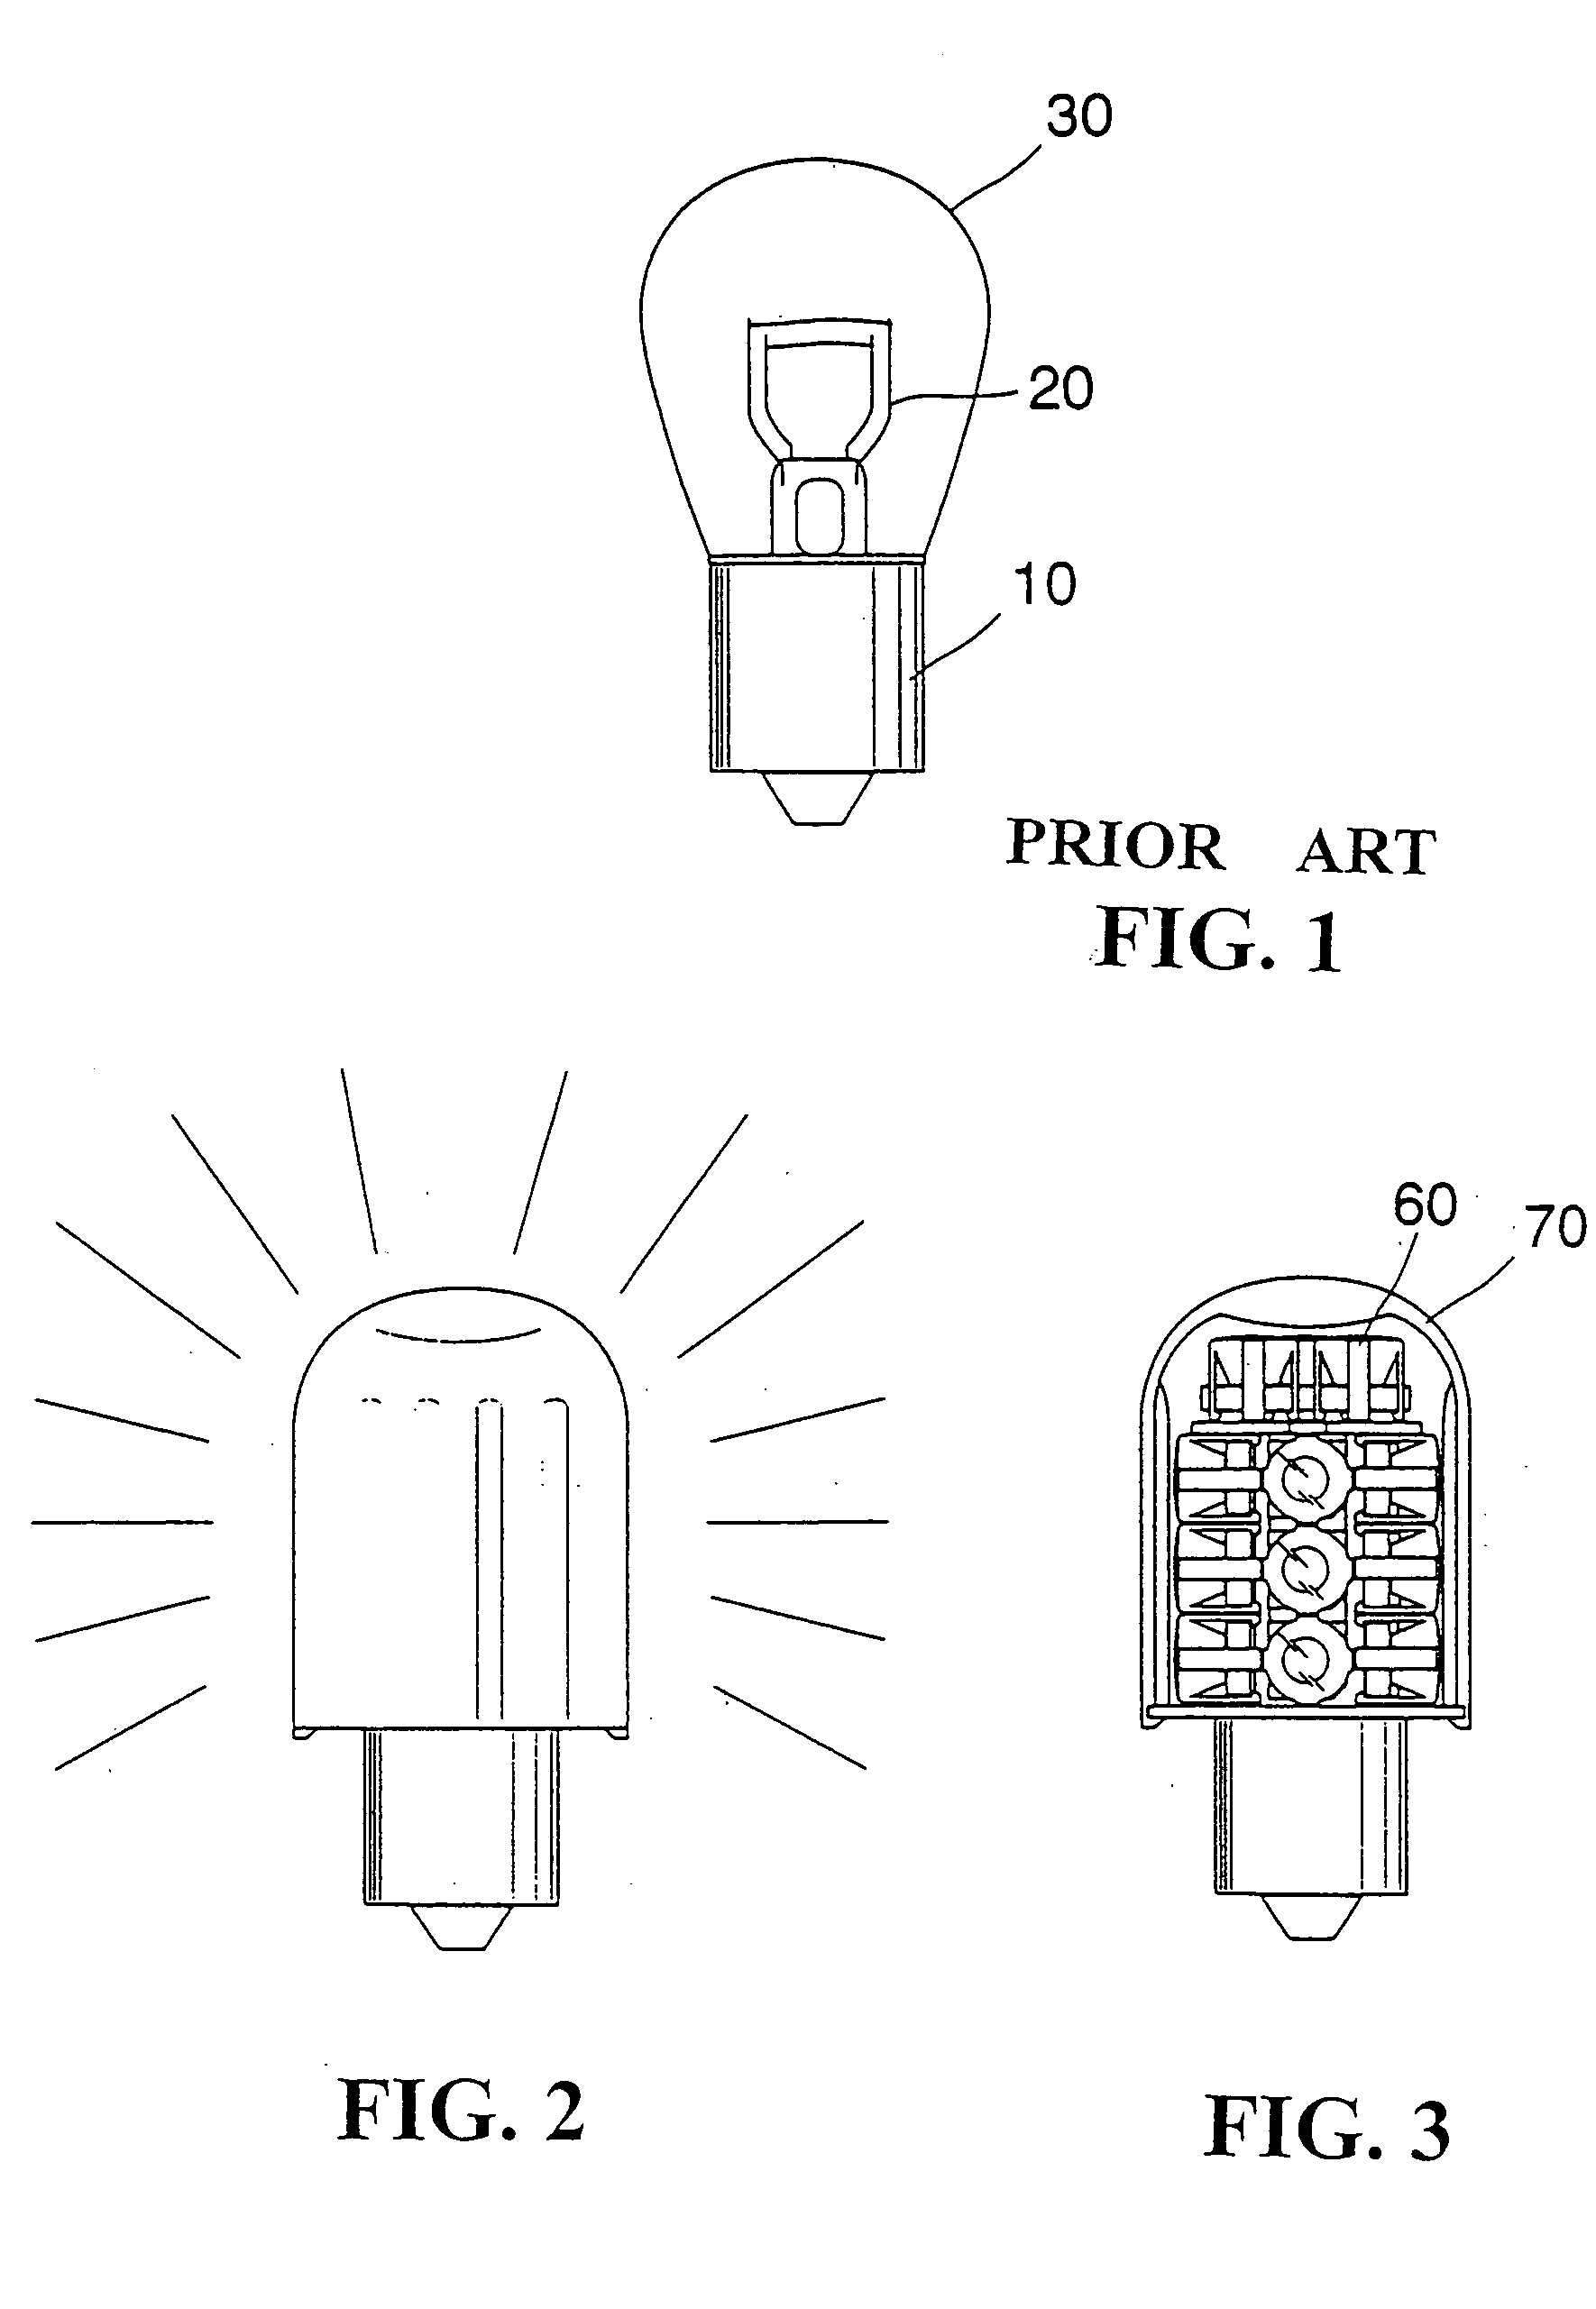 Gain structure of an LED